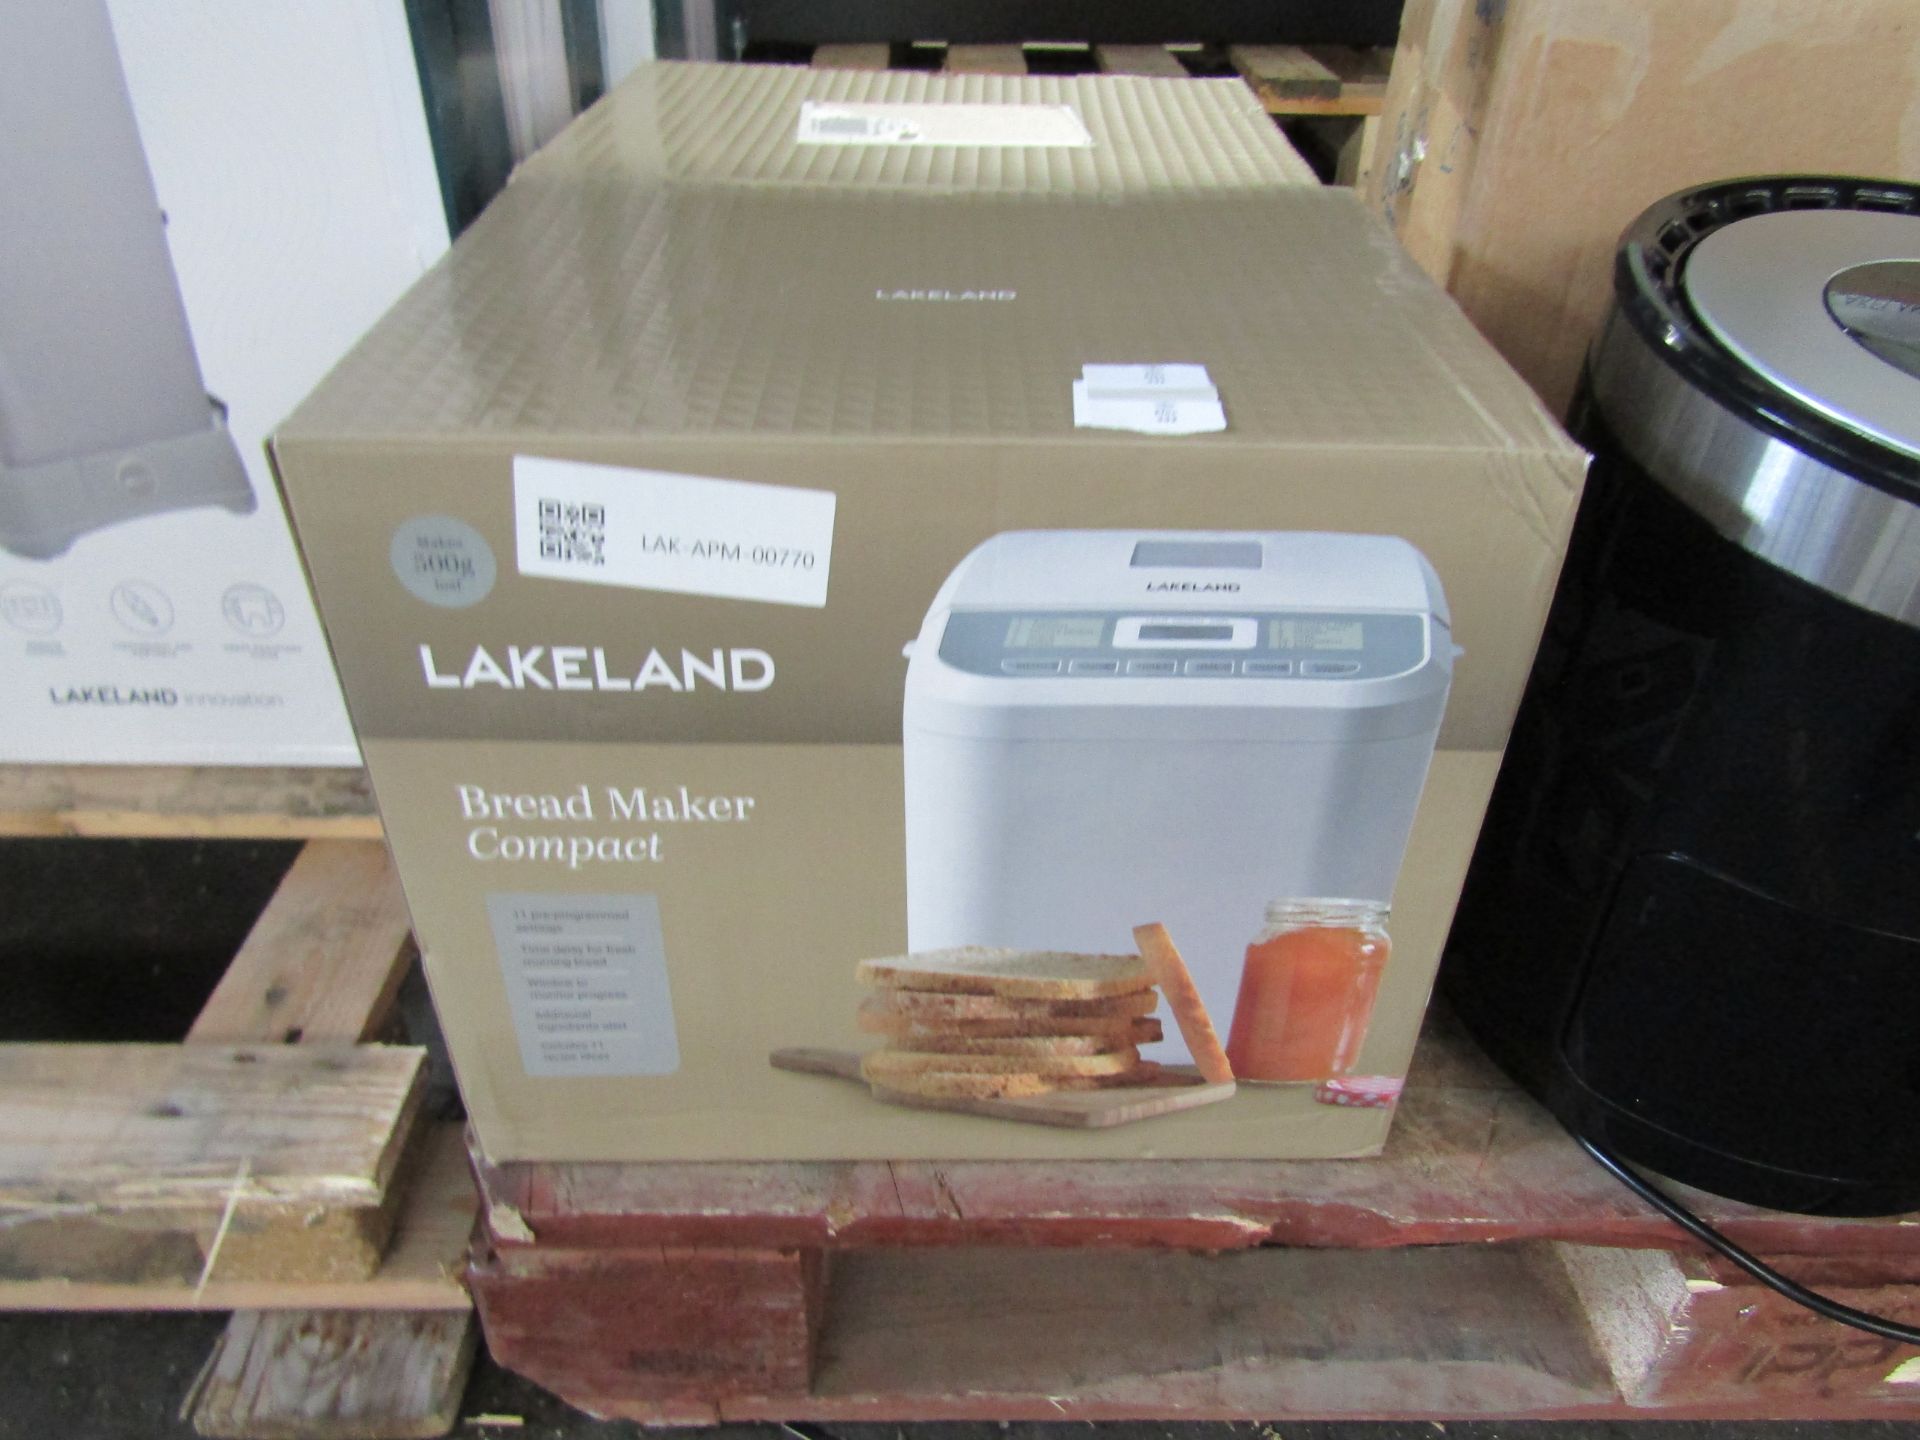 Mixed Lot of 2 x Lakeland Customer Returns for Repair or Upcycling - Total RRP approx 159.98 This